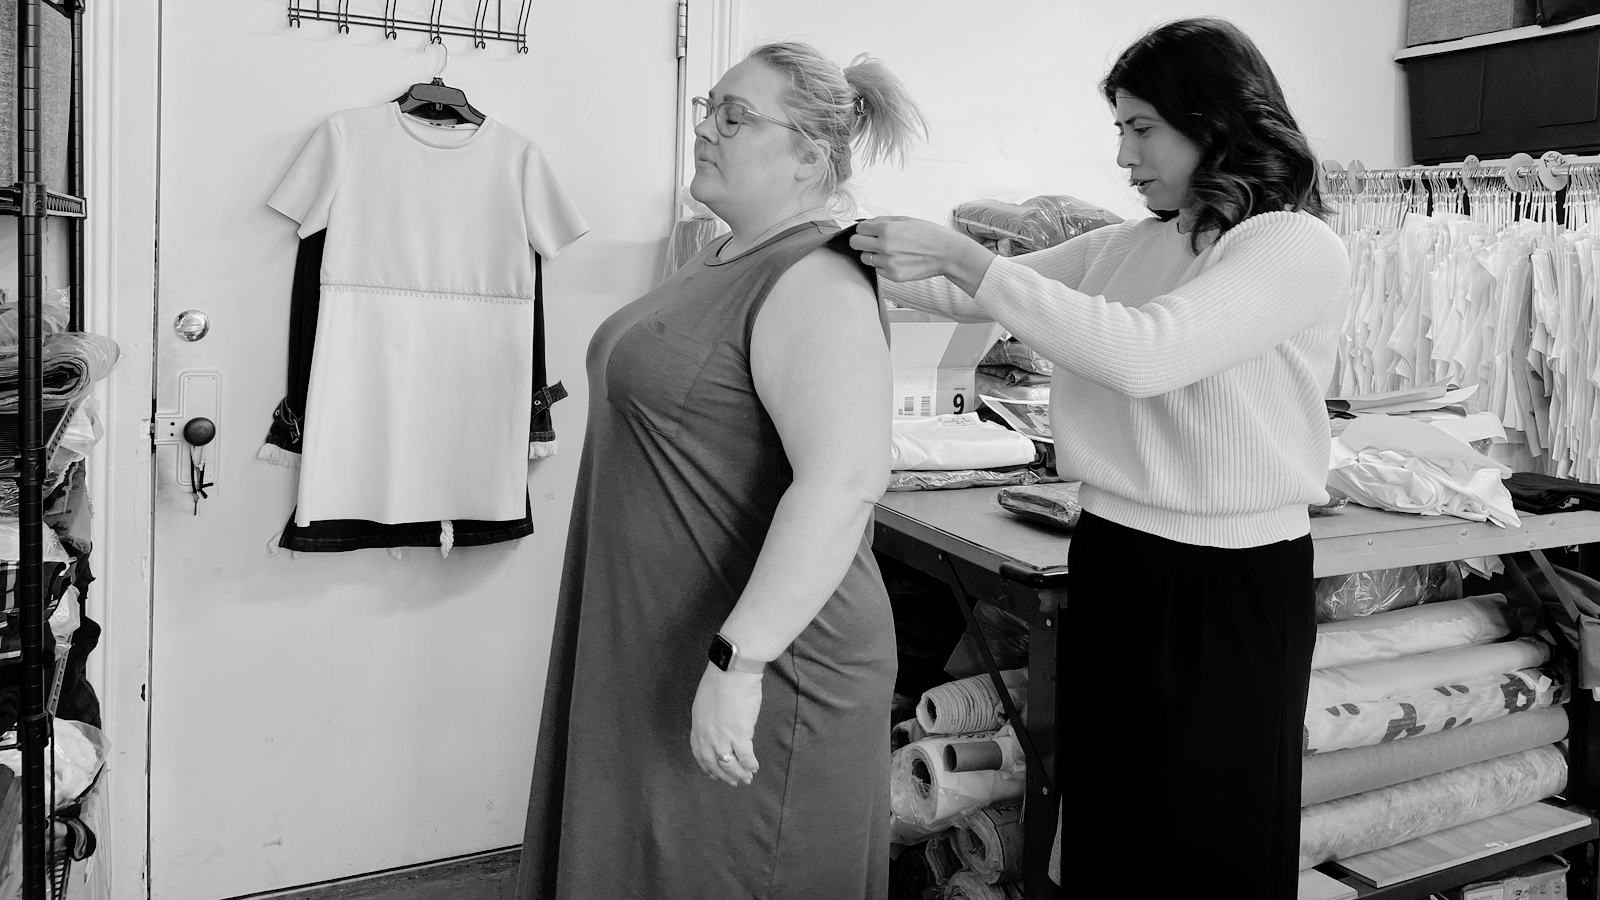 Making Space: Extended Sizing in Slow Fashion